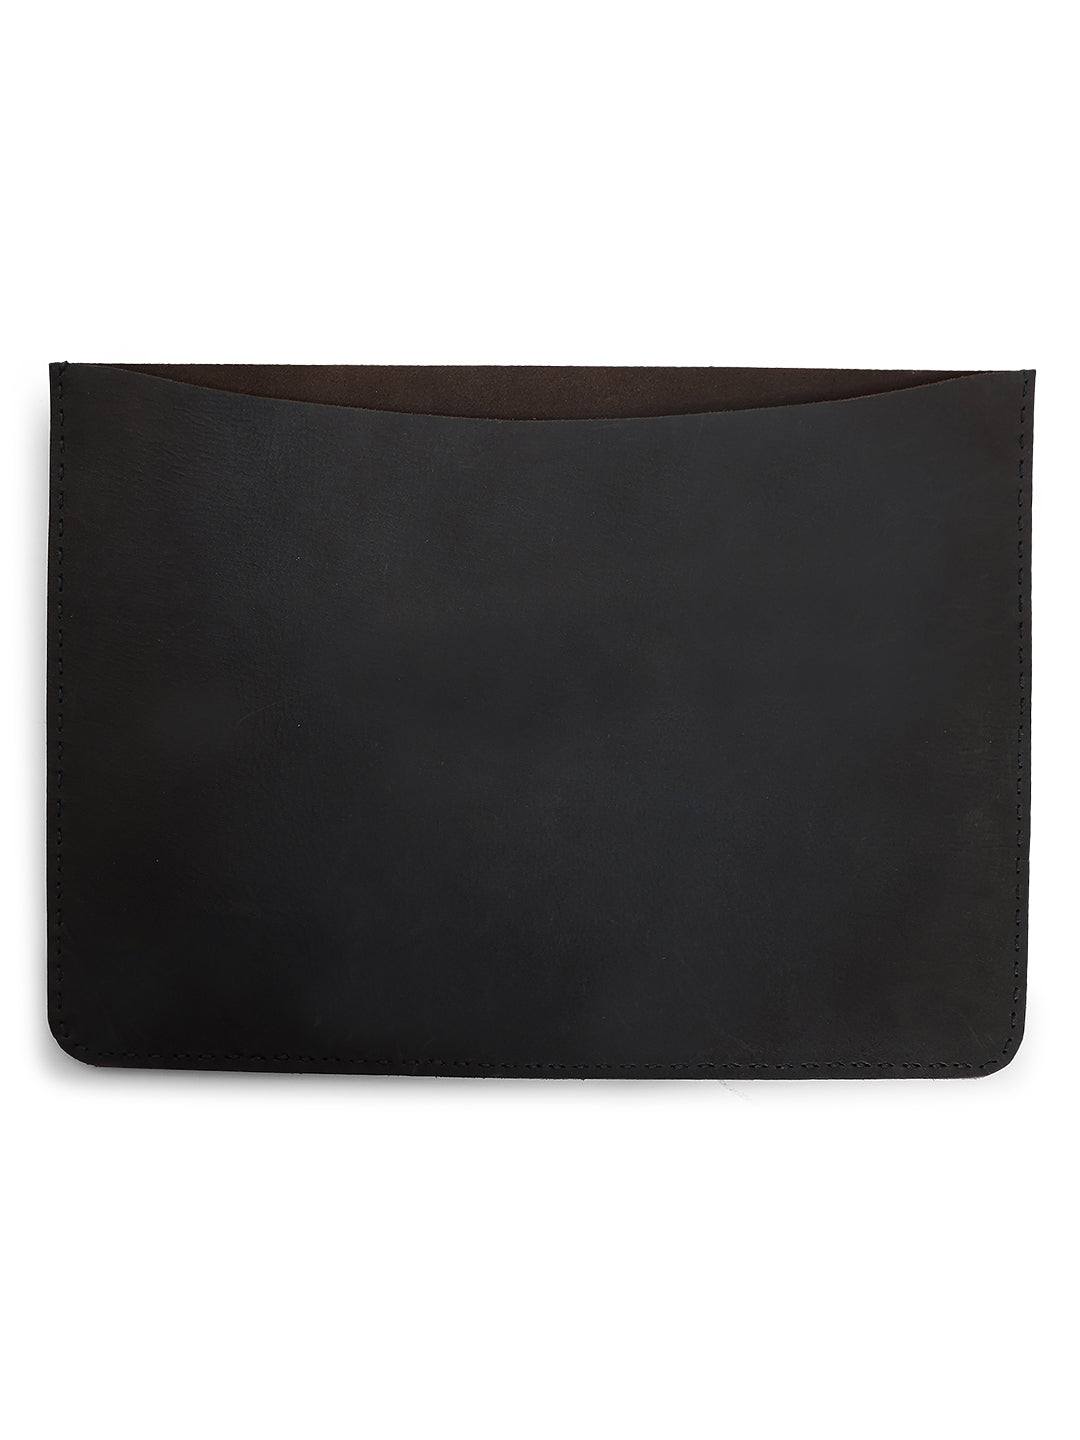 Classic Protection: Navy Leather Laptop Sleeves for Timeless Style